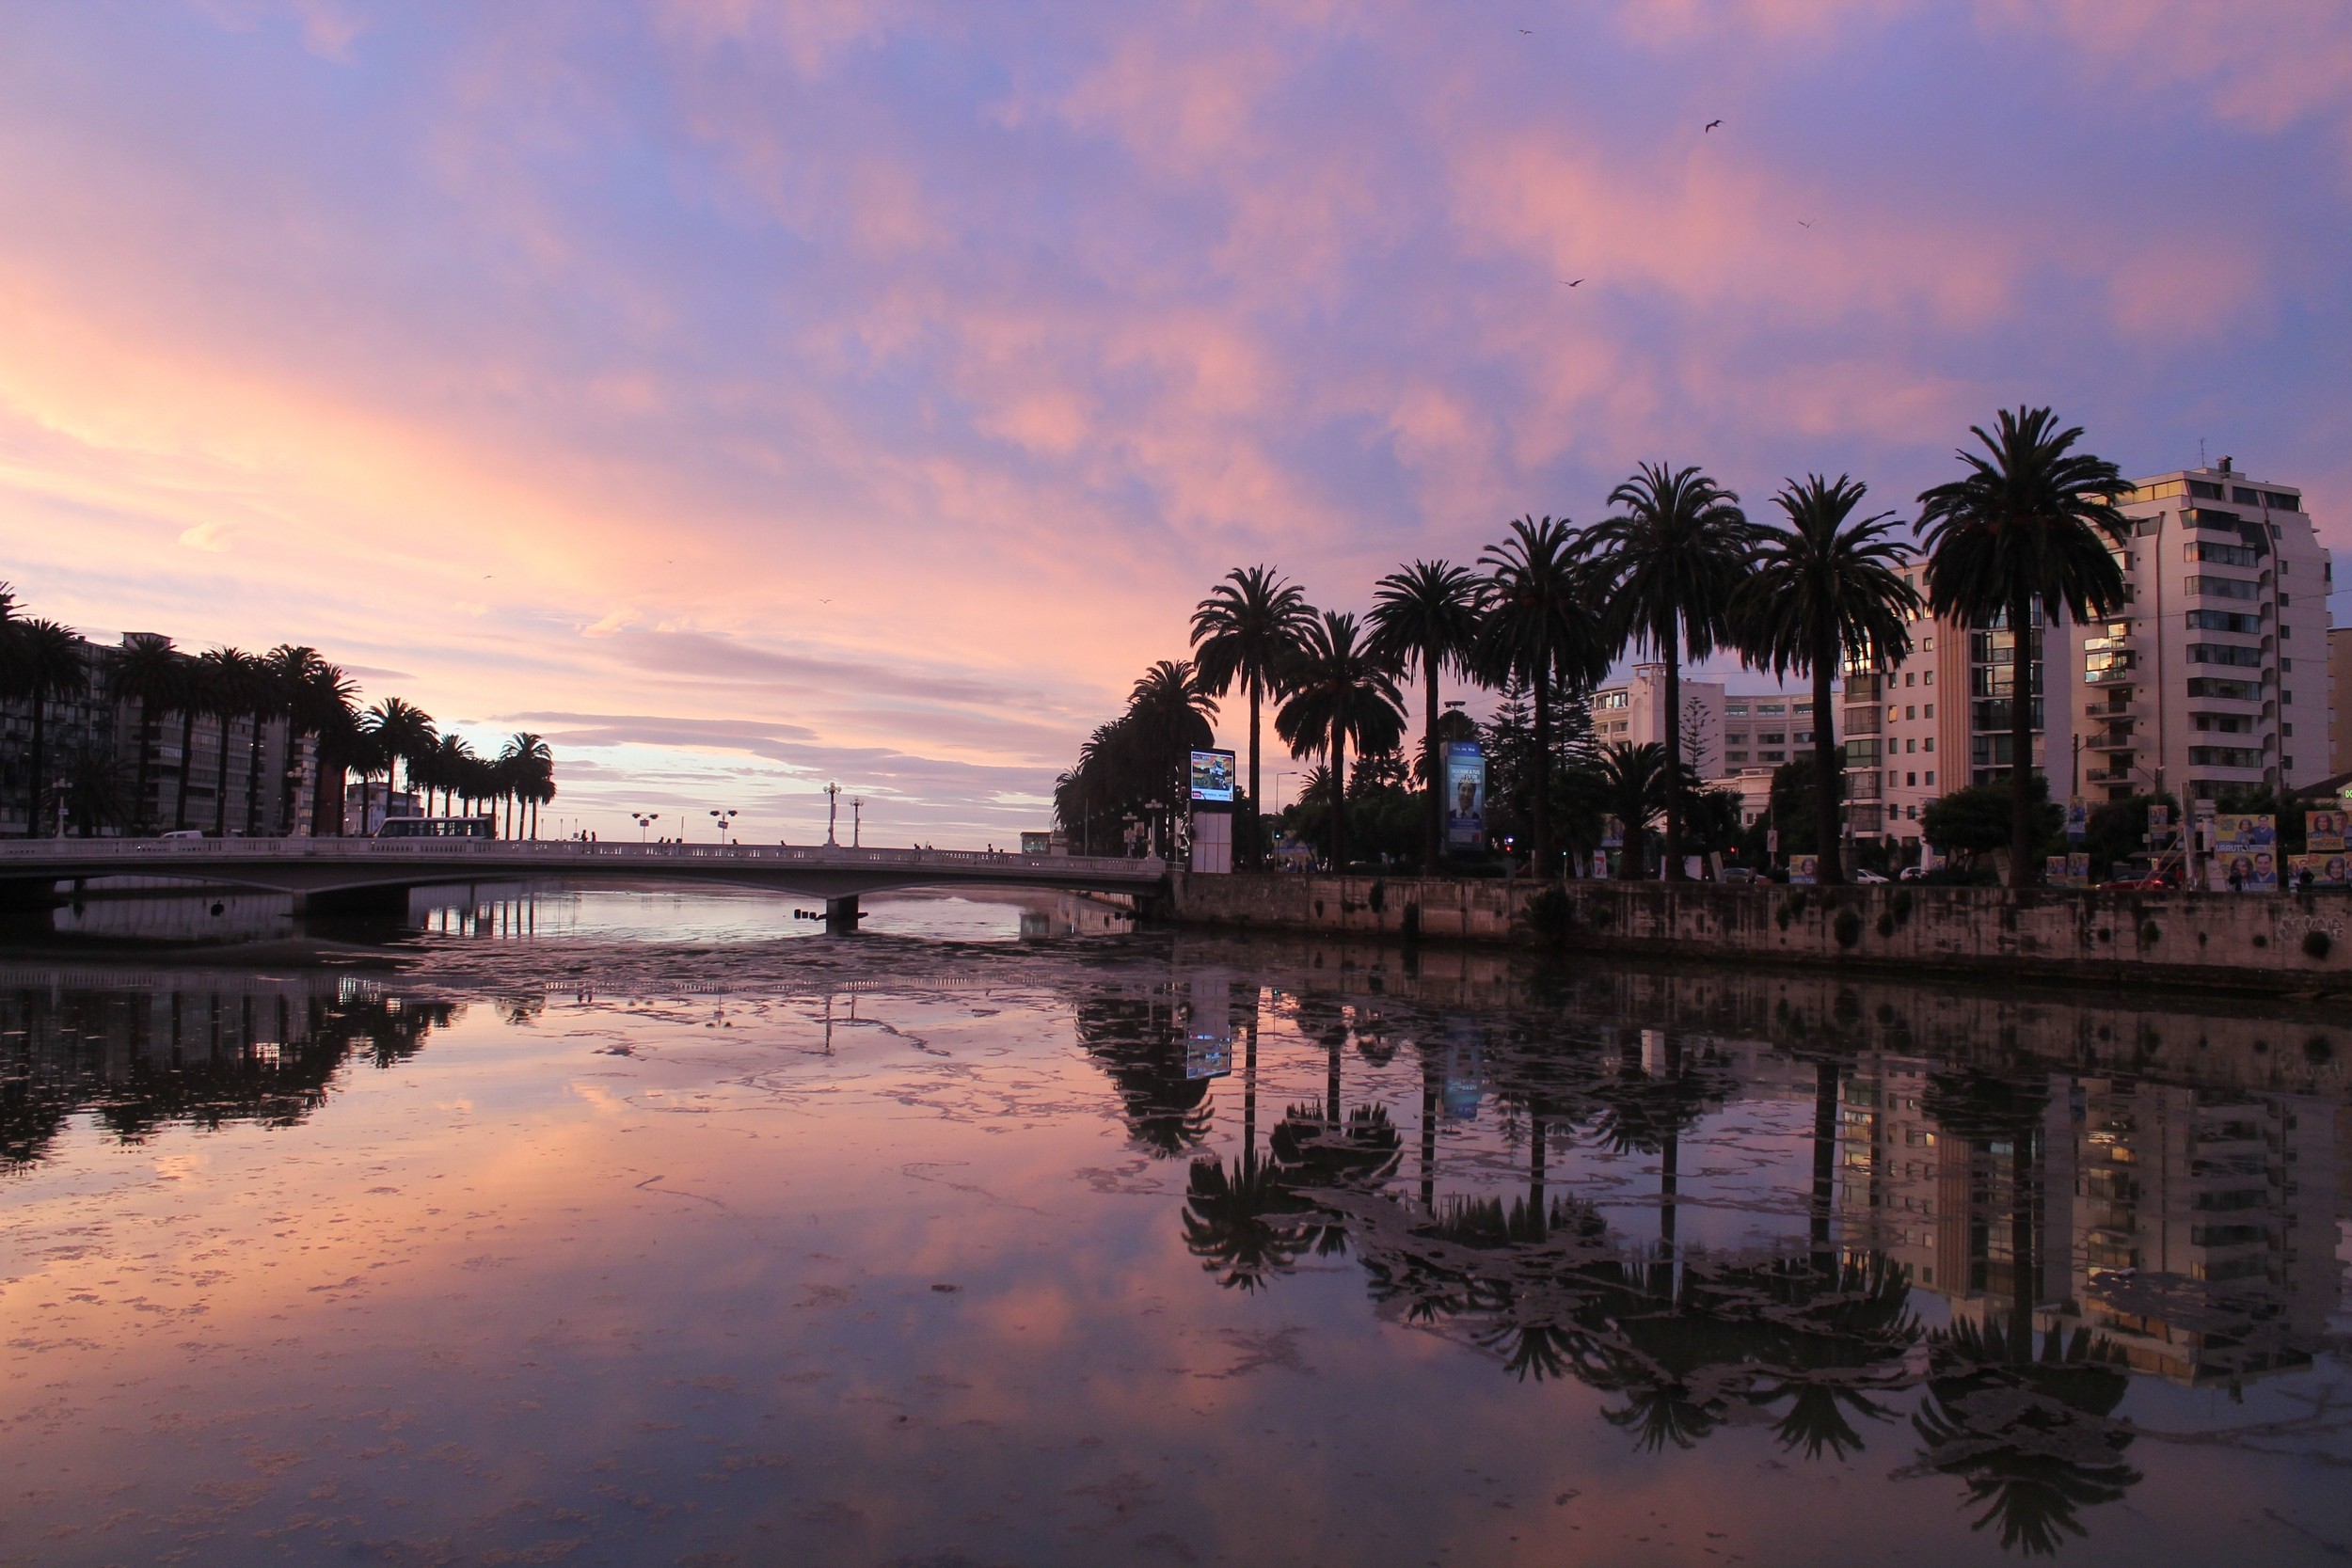 General 2500x1667 photography sunset palm trees bridge building river reflection clouds architecture Vina del Mar Chile South America sky city